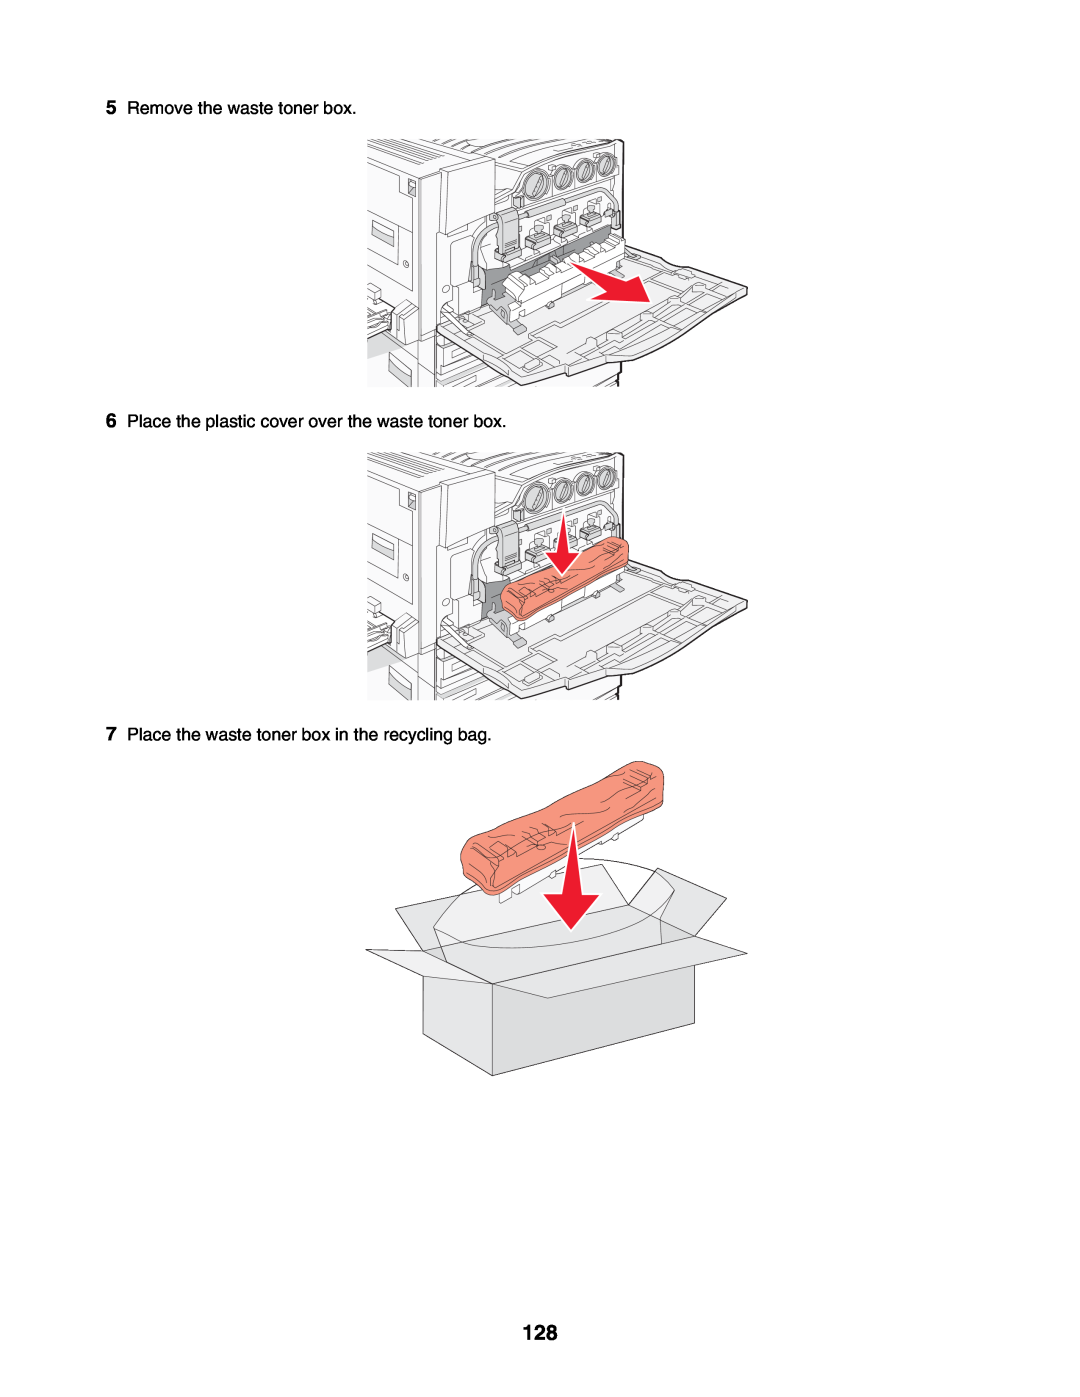 Lexmark C935 manual Remove the waste toner box, Place the plastic cover over the waste toner box 